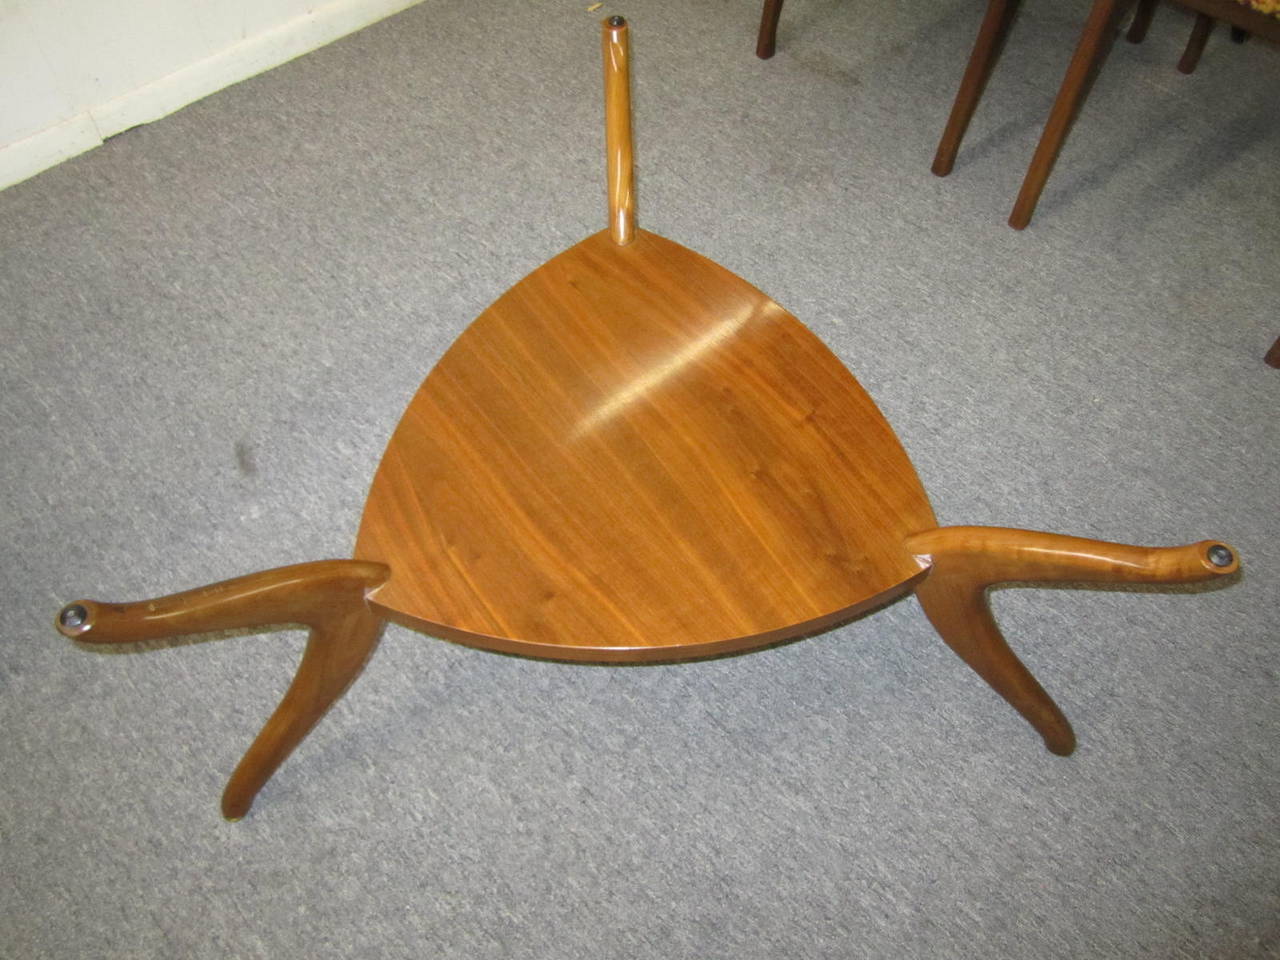 Sculptural walnut triangular coffee table.  3 well carved curved legs hold up a single walnut platform.  The triangular shaped glass looks great on top.